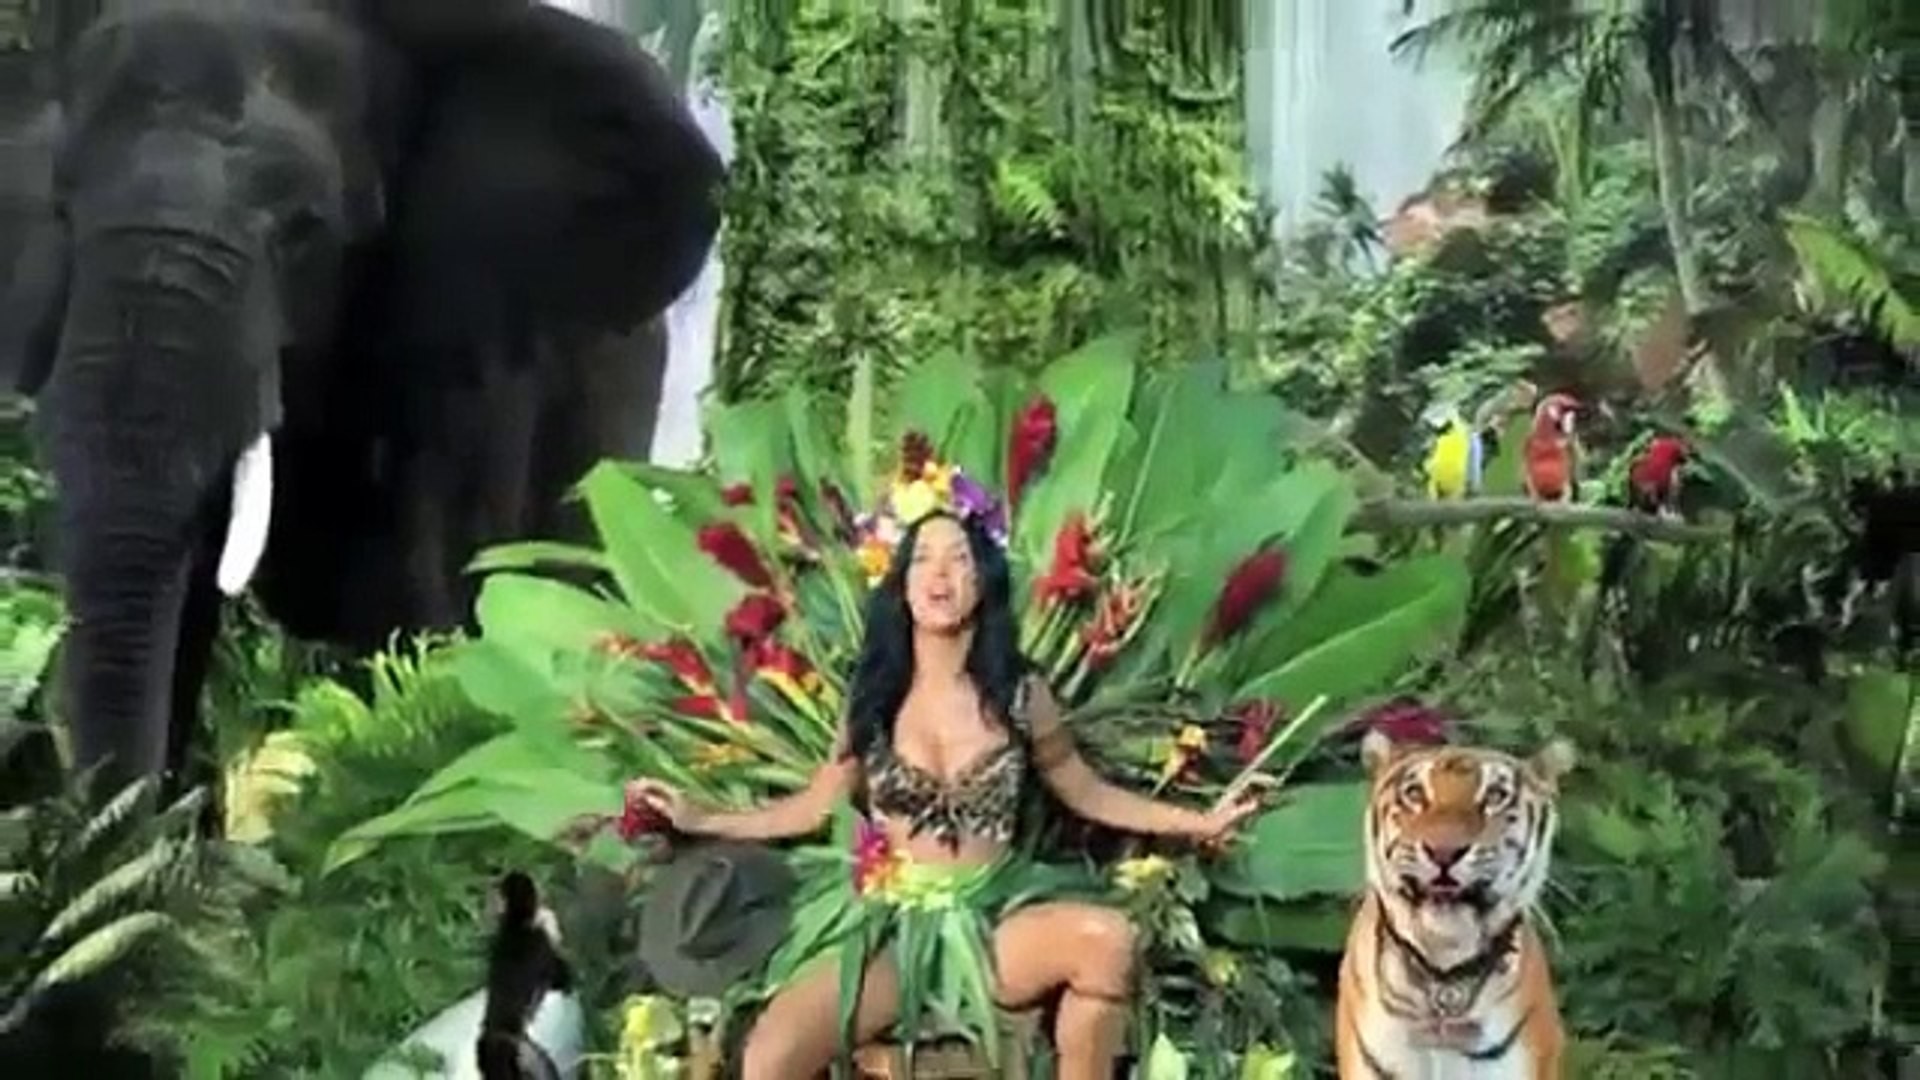 1920x1080 Katy Perry - Roar Music Video Makeup Tutorial *NEW 2015* - video dailymotion